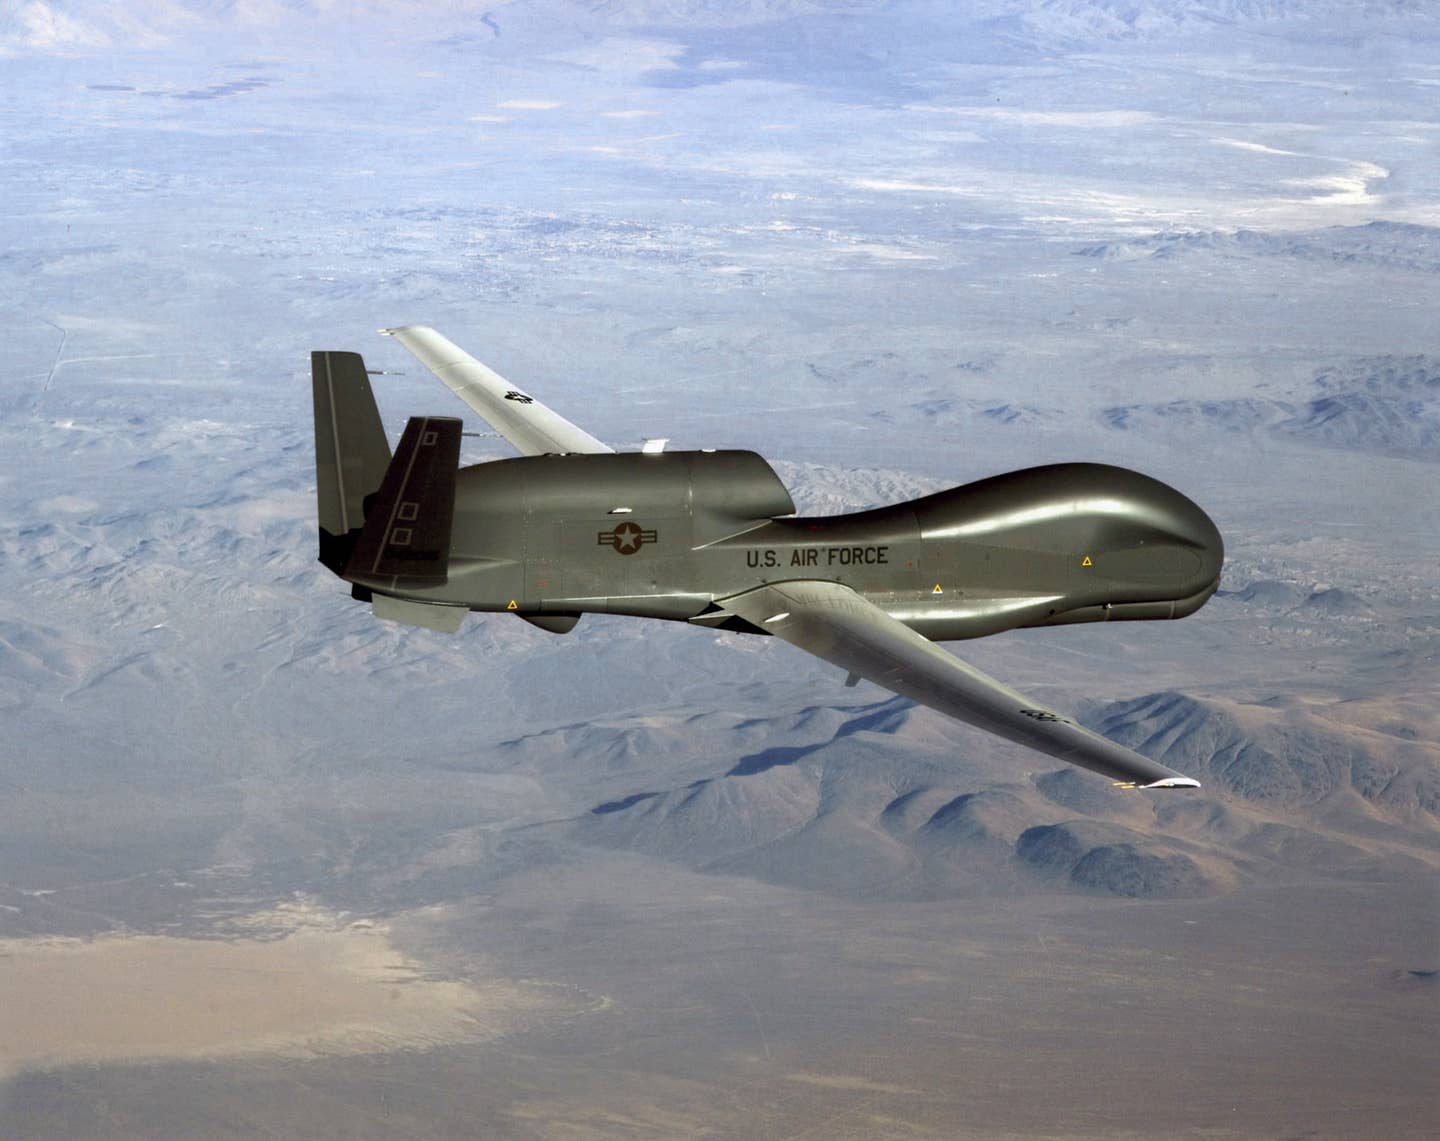 An RQ-4 Global Hawk soars through the sky to record intelligence, surveillance, and reconnaissance data. <em>Credit: U.S. Air Force</em>